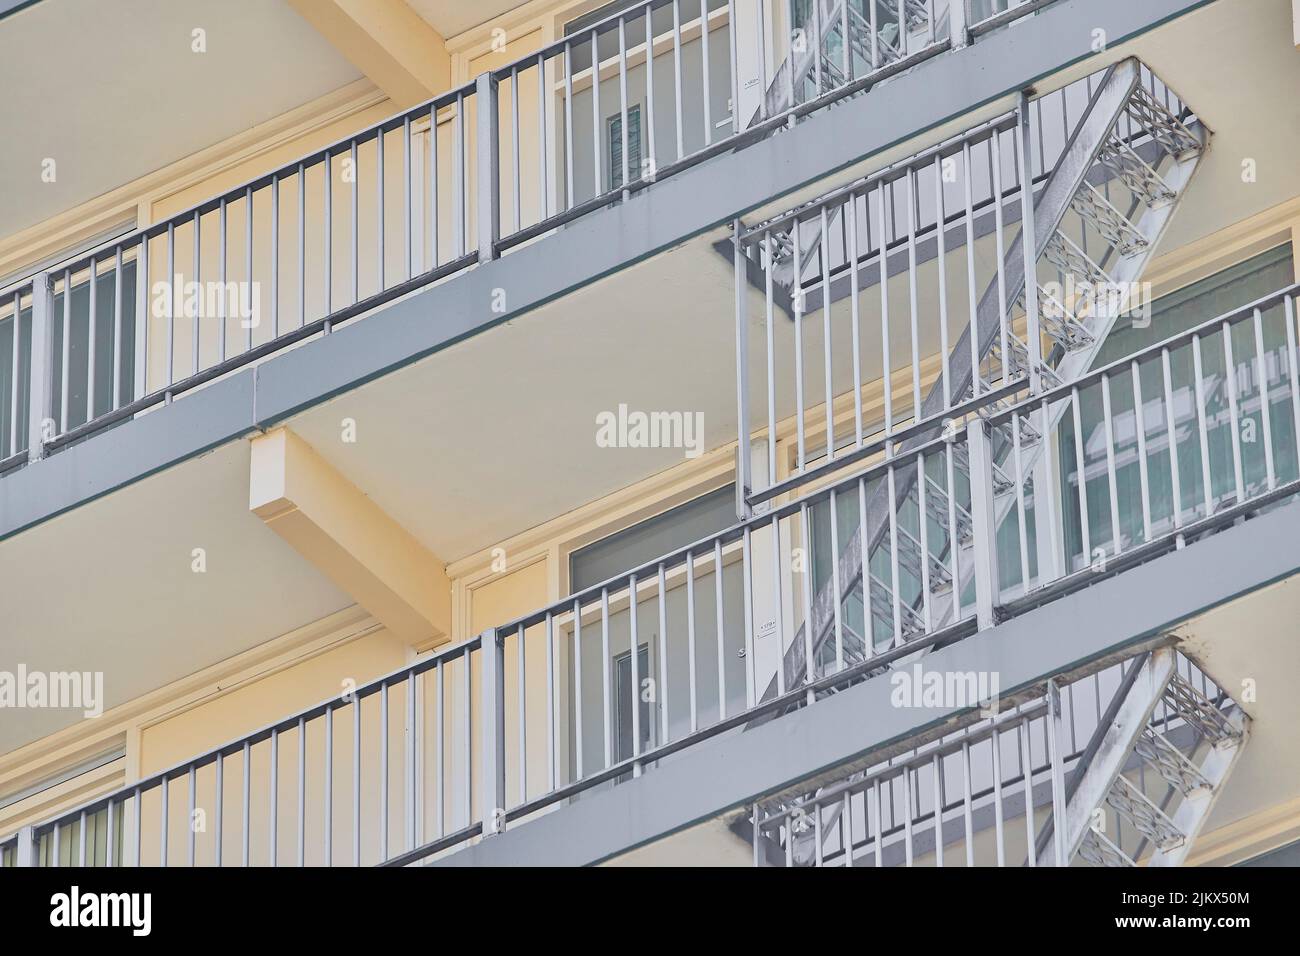 A low angle shot of building balconies and emergency stairs - great for backgrounds Stock Photo